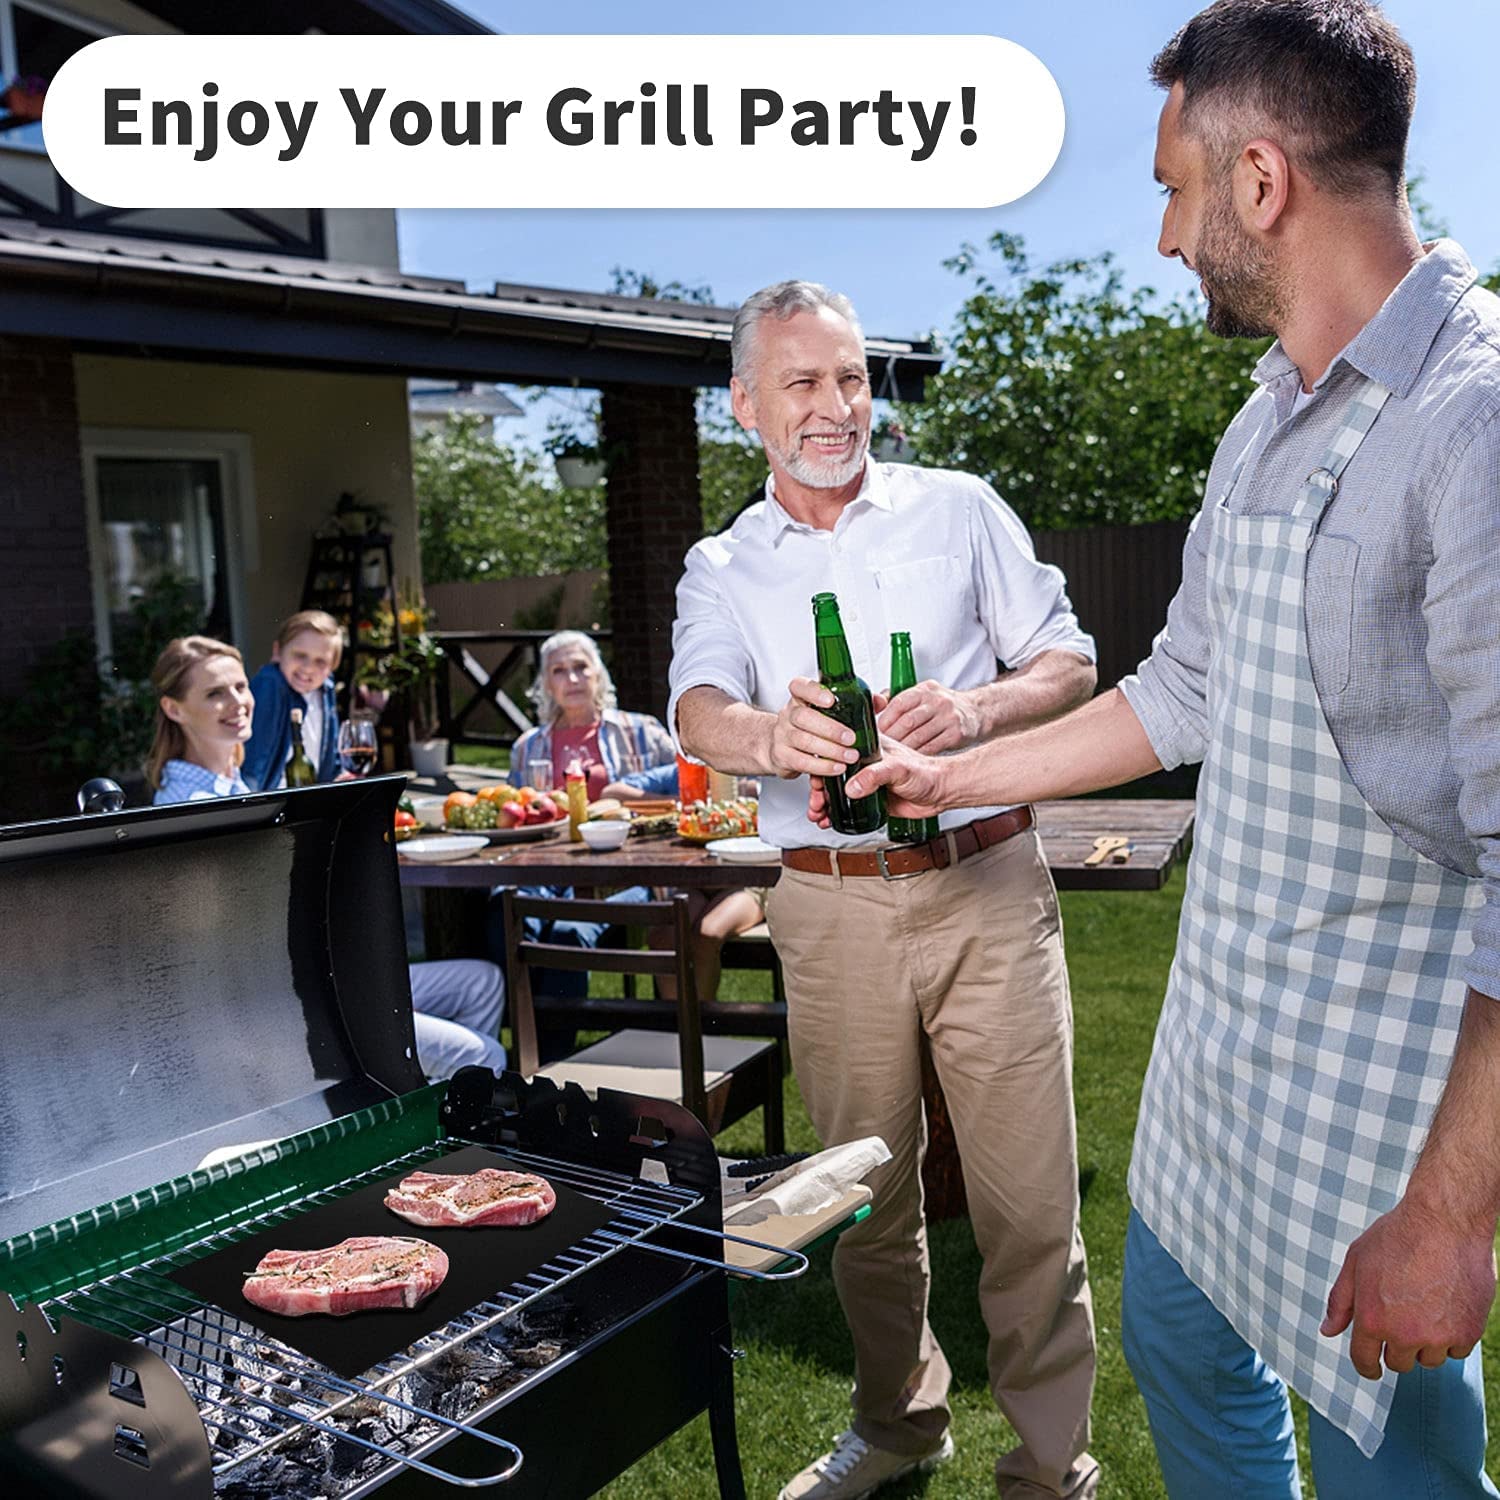 Grill Mats for Outdoor Grill -Set of 5 Nonstick BBQ Grill Mat 15.75 X 13", Reusable & Heavy Duty under Grill Mat, Easy to Clean, Works for Gas, Charcoal, Electric Grill